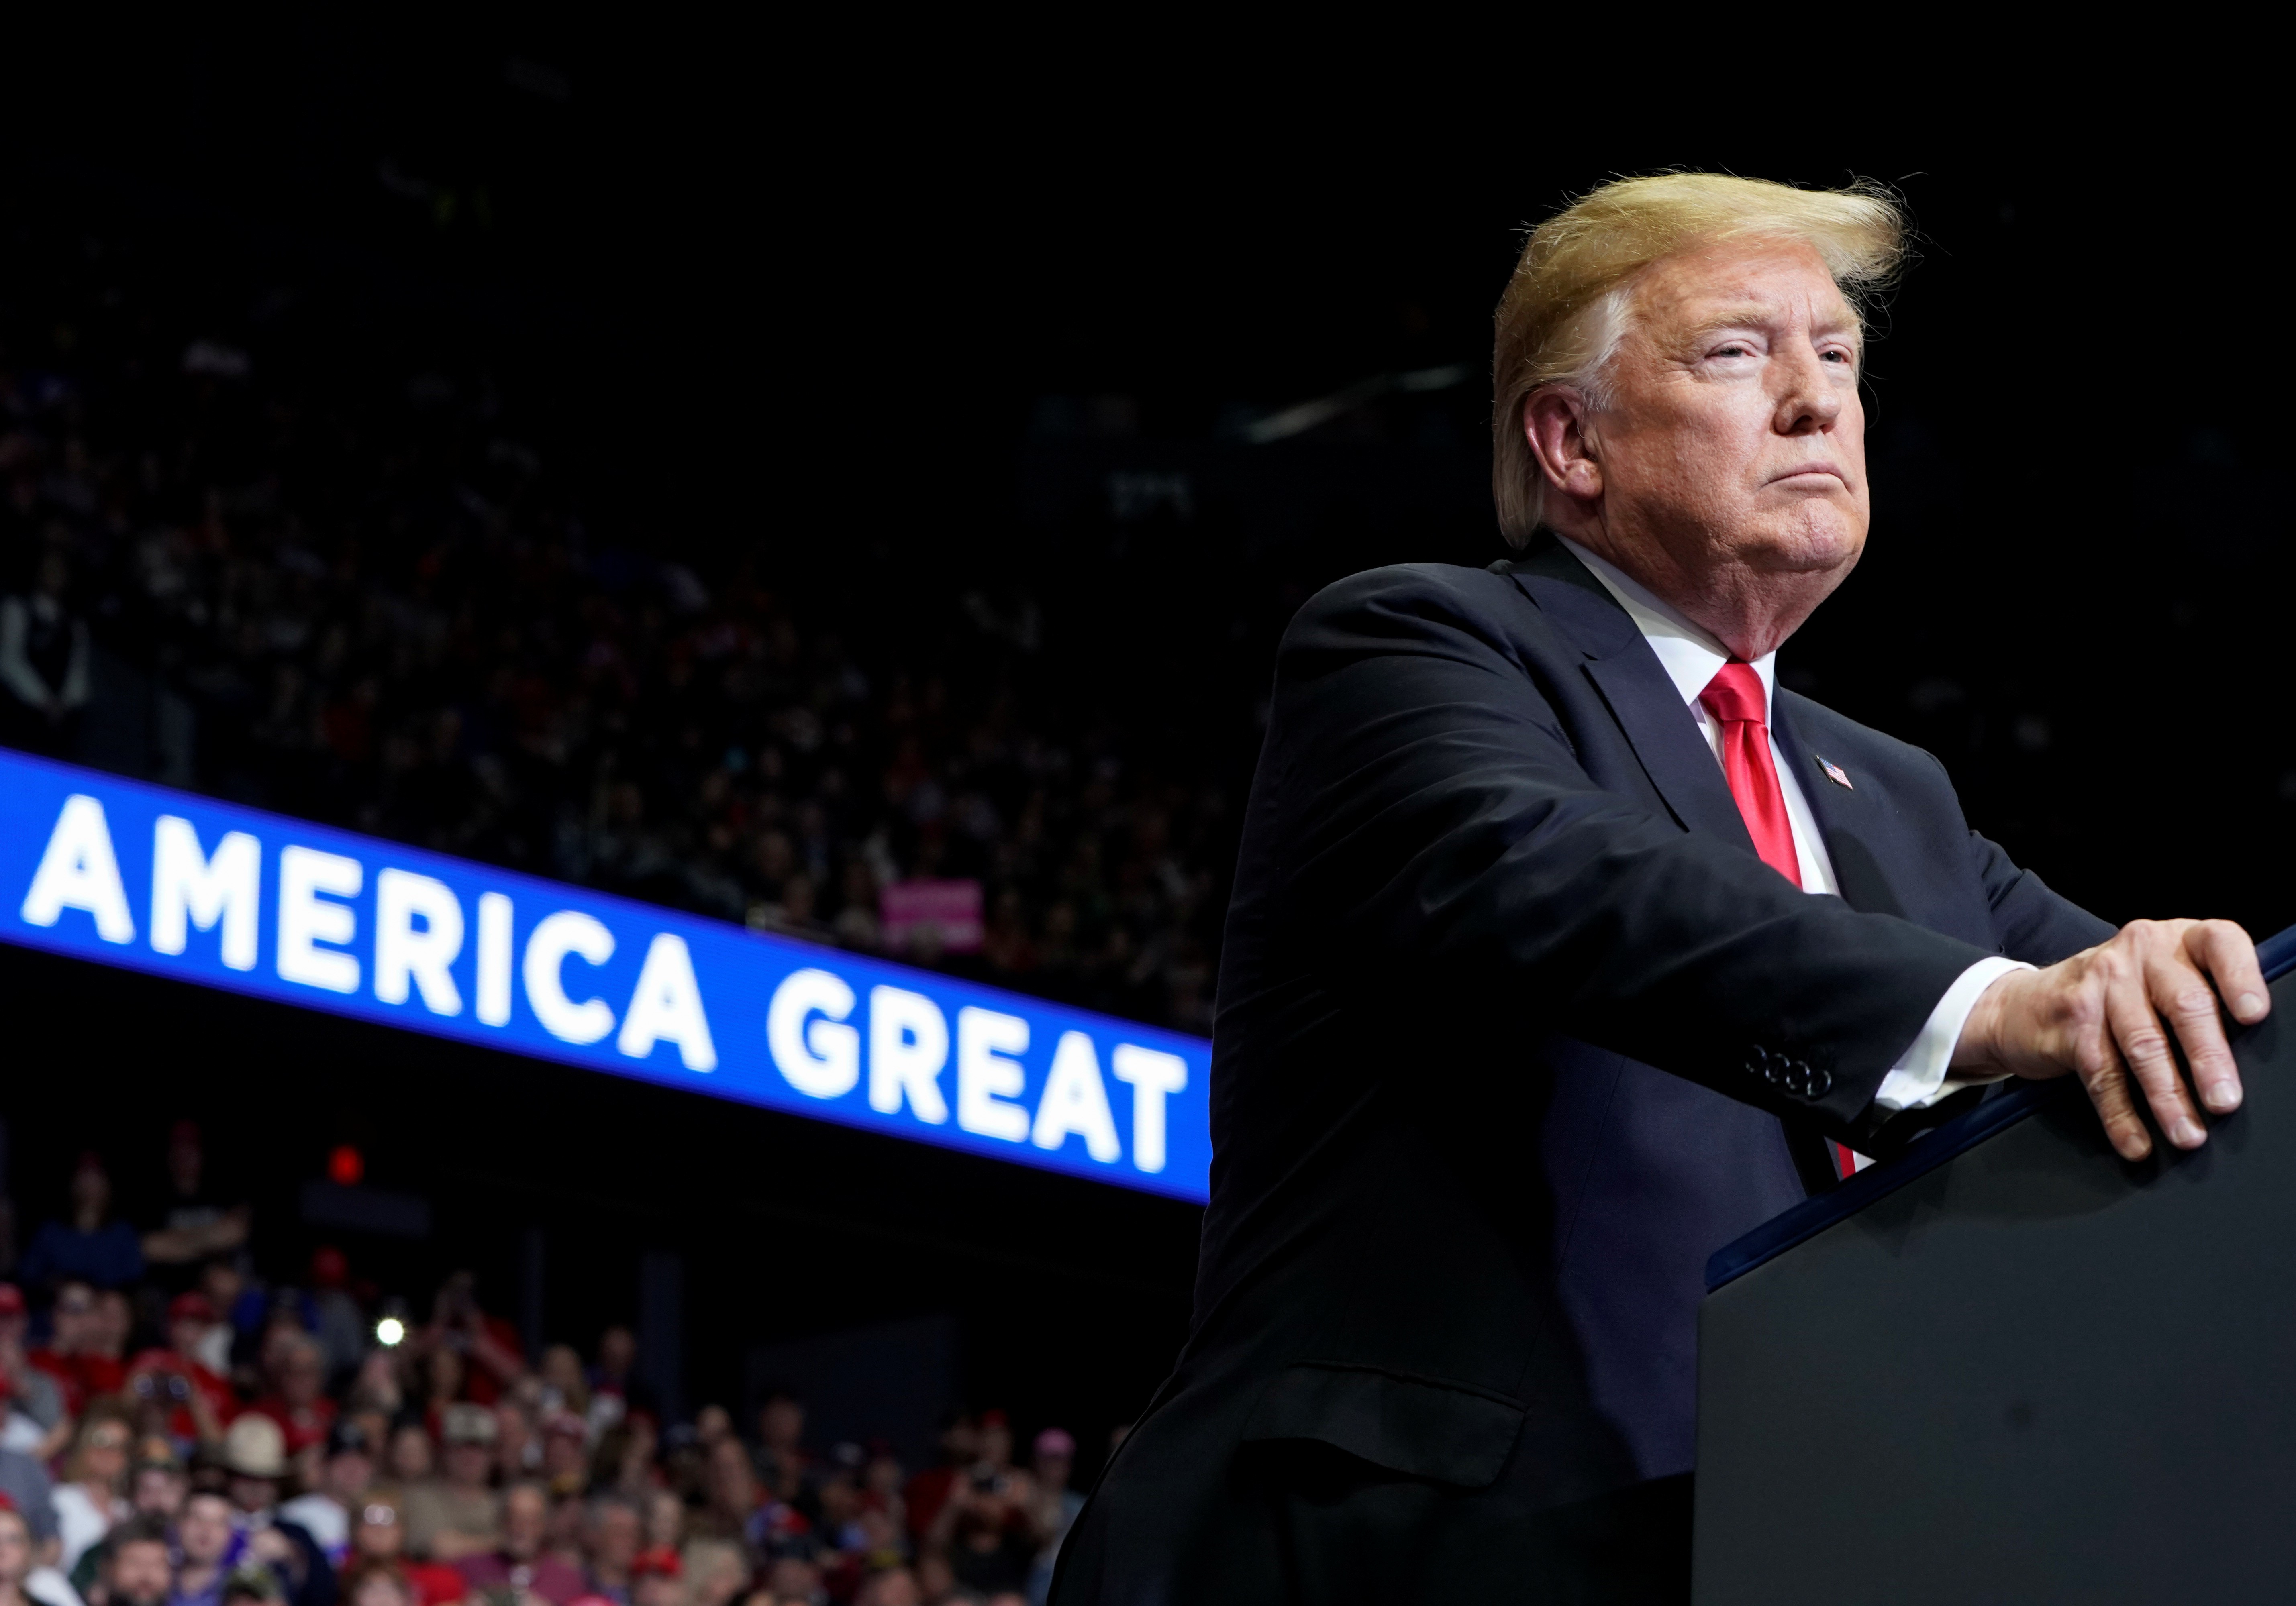 US President Donald Trump speaks during a “Make America Great Again” rally in Grand Rapids, Michigan, on March 28, 2019. Photo: Reuters